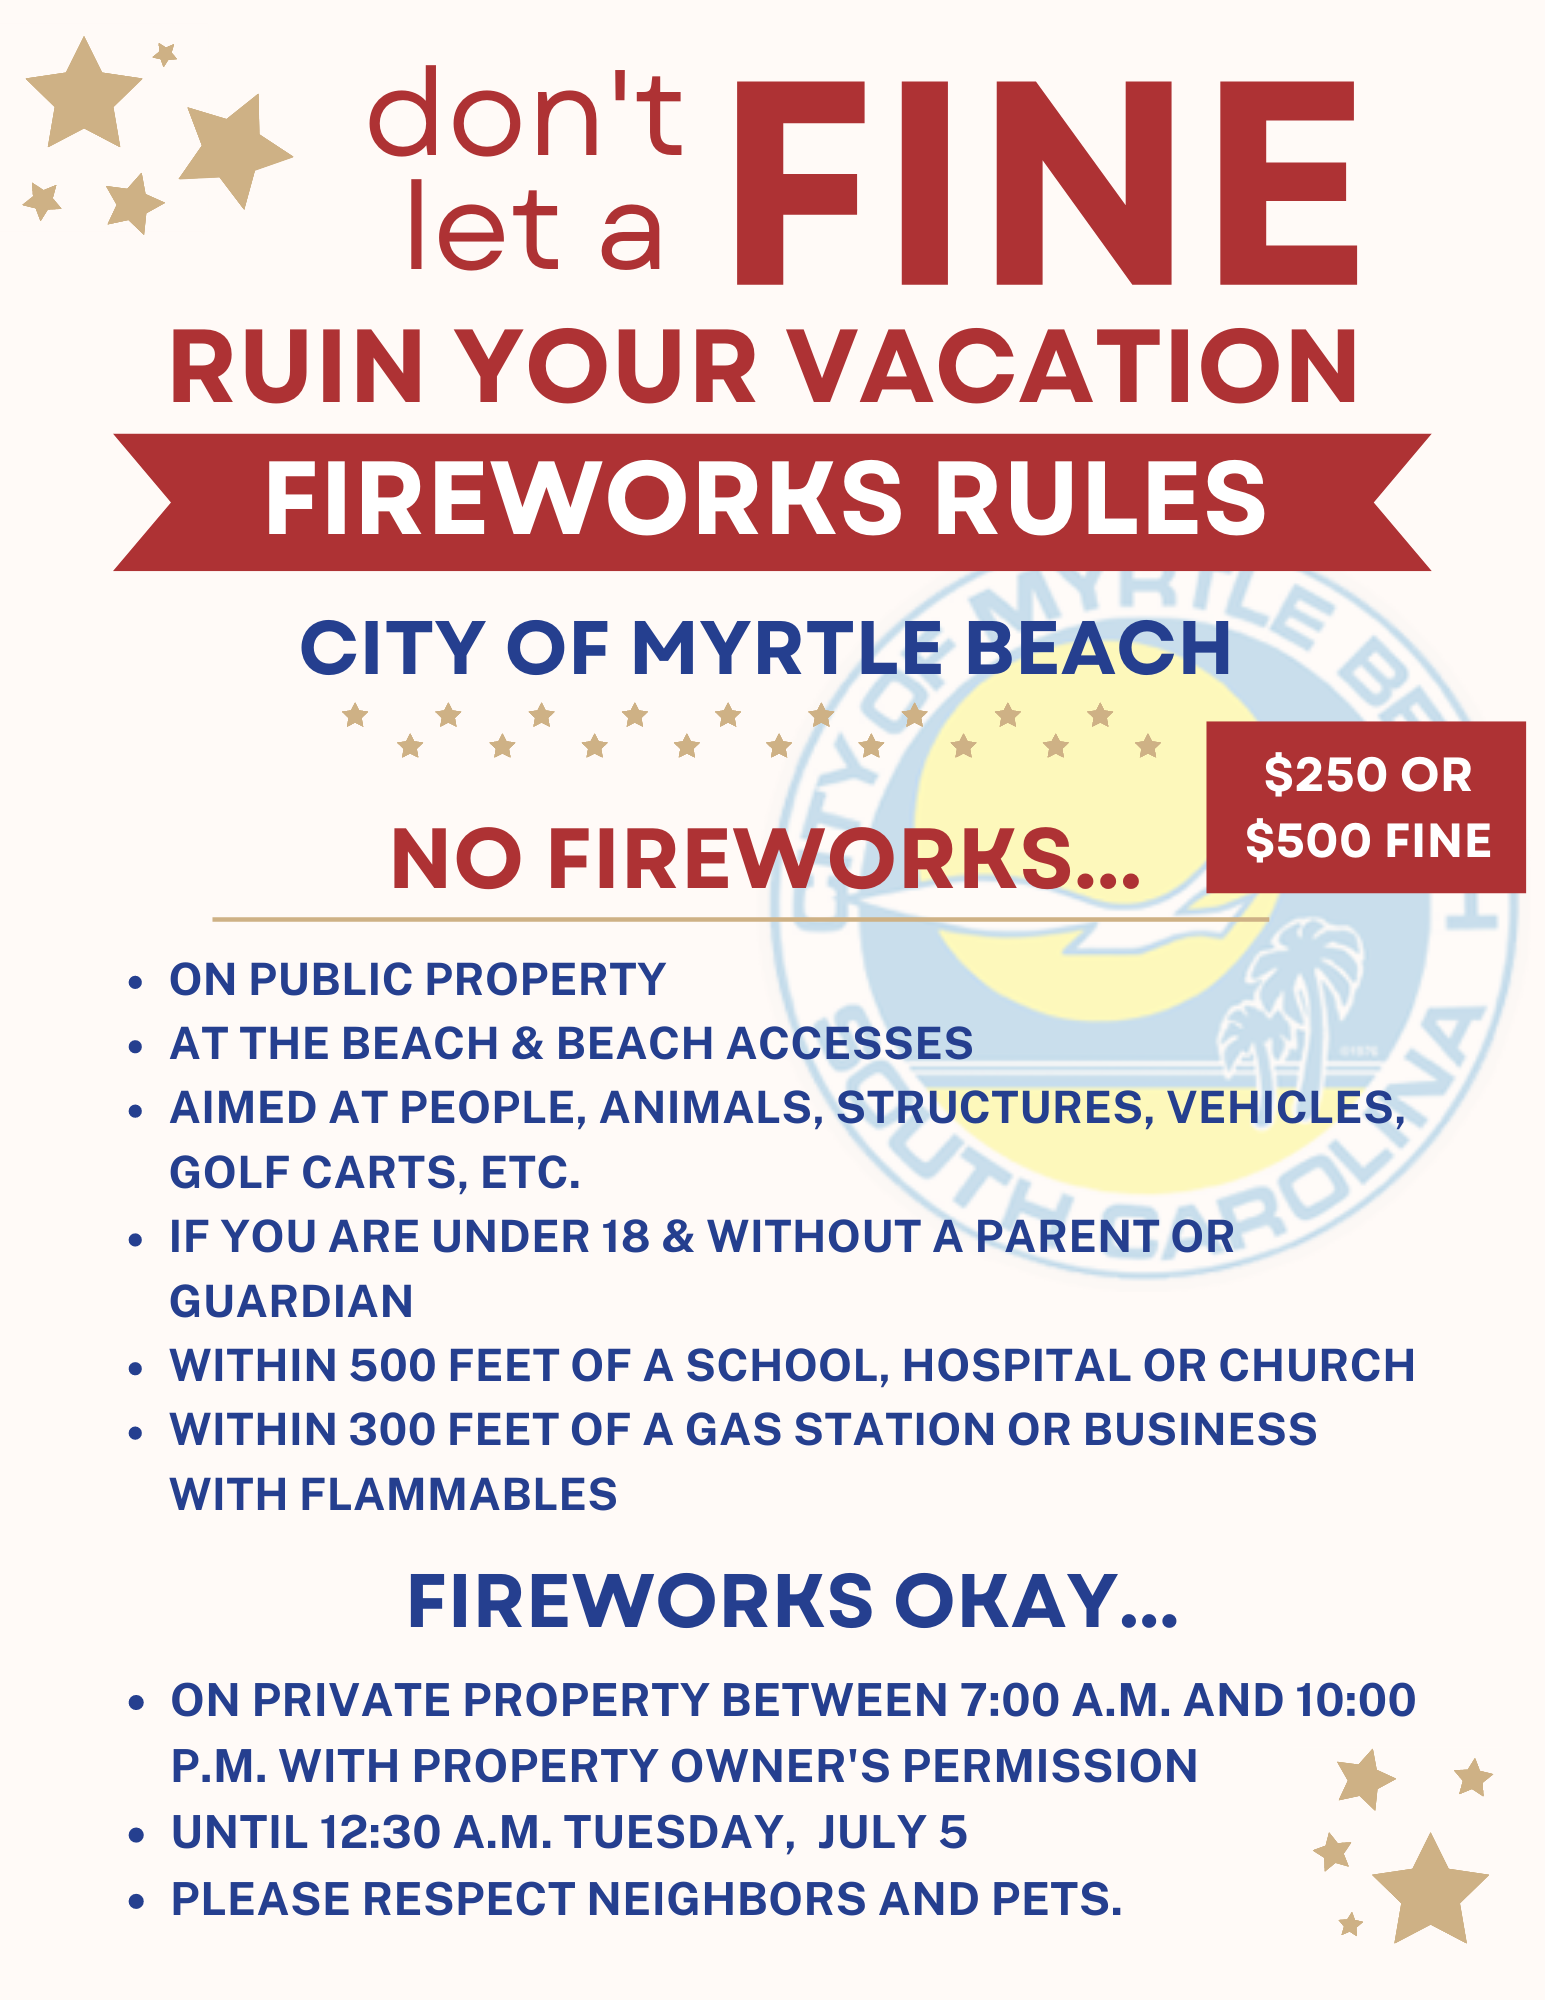 1. South Carolina law about fireworks regulation has changed, and the City of Myrtle Beach has updated its ordinance to comply. The city’s new rule allows fireworks on private property – with limits about ti (2)